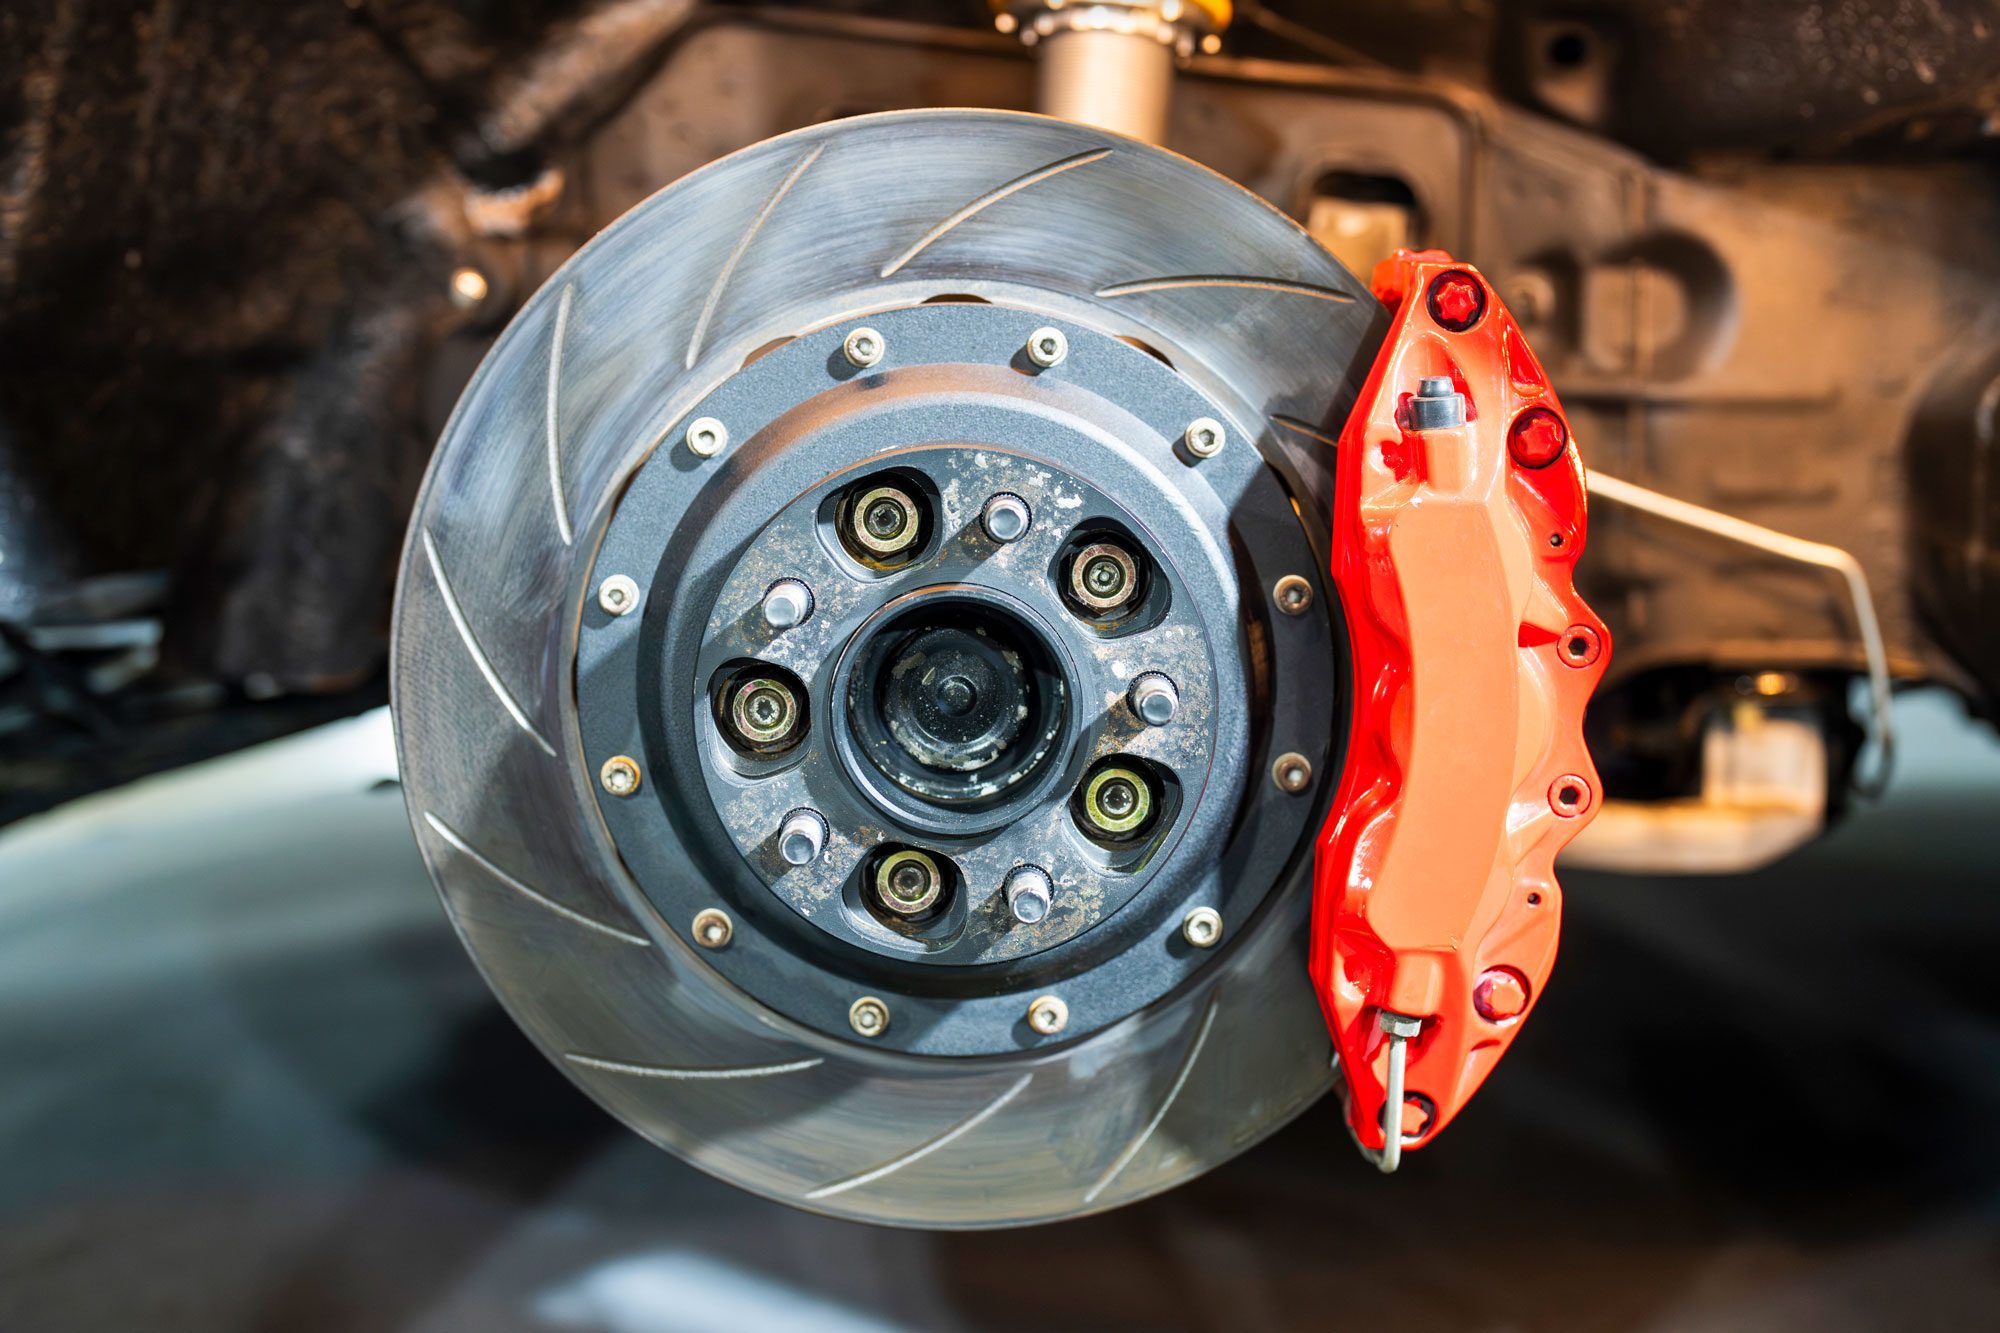 DOT 3 vs. DOT 4 Brake Fluid: What's the Difference?